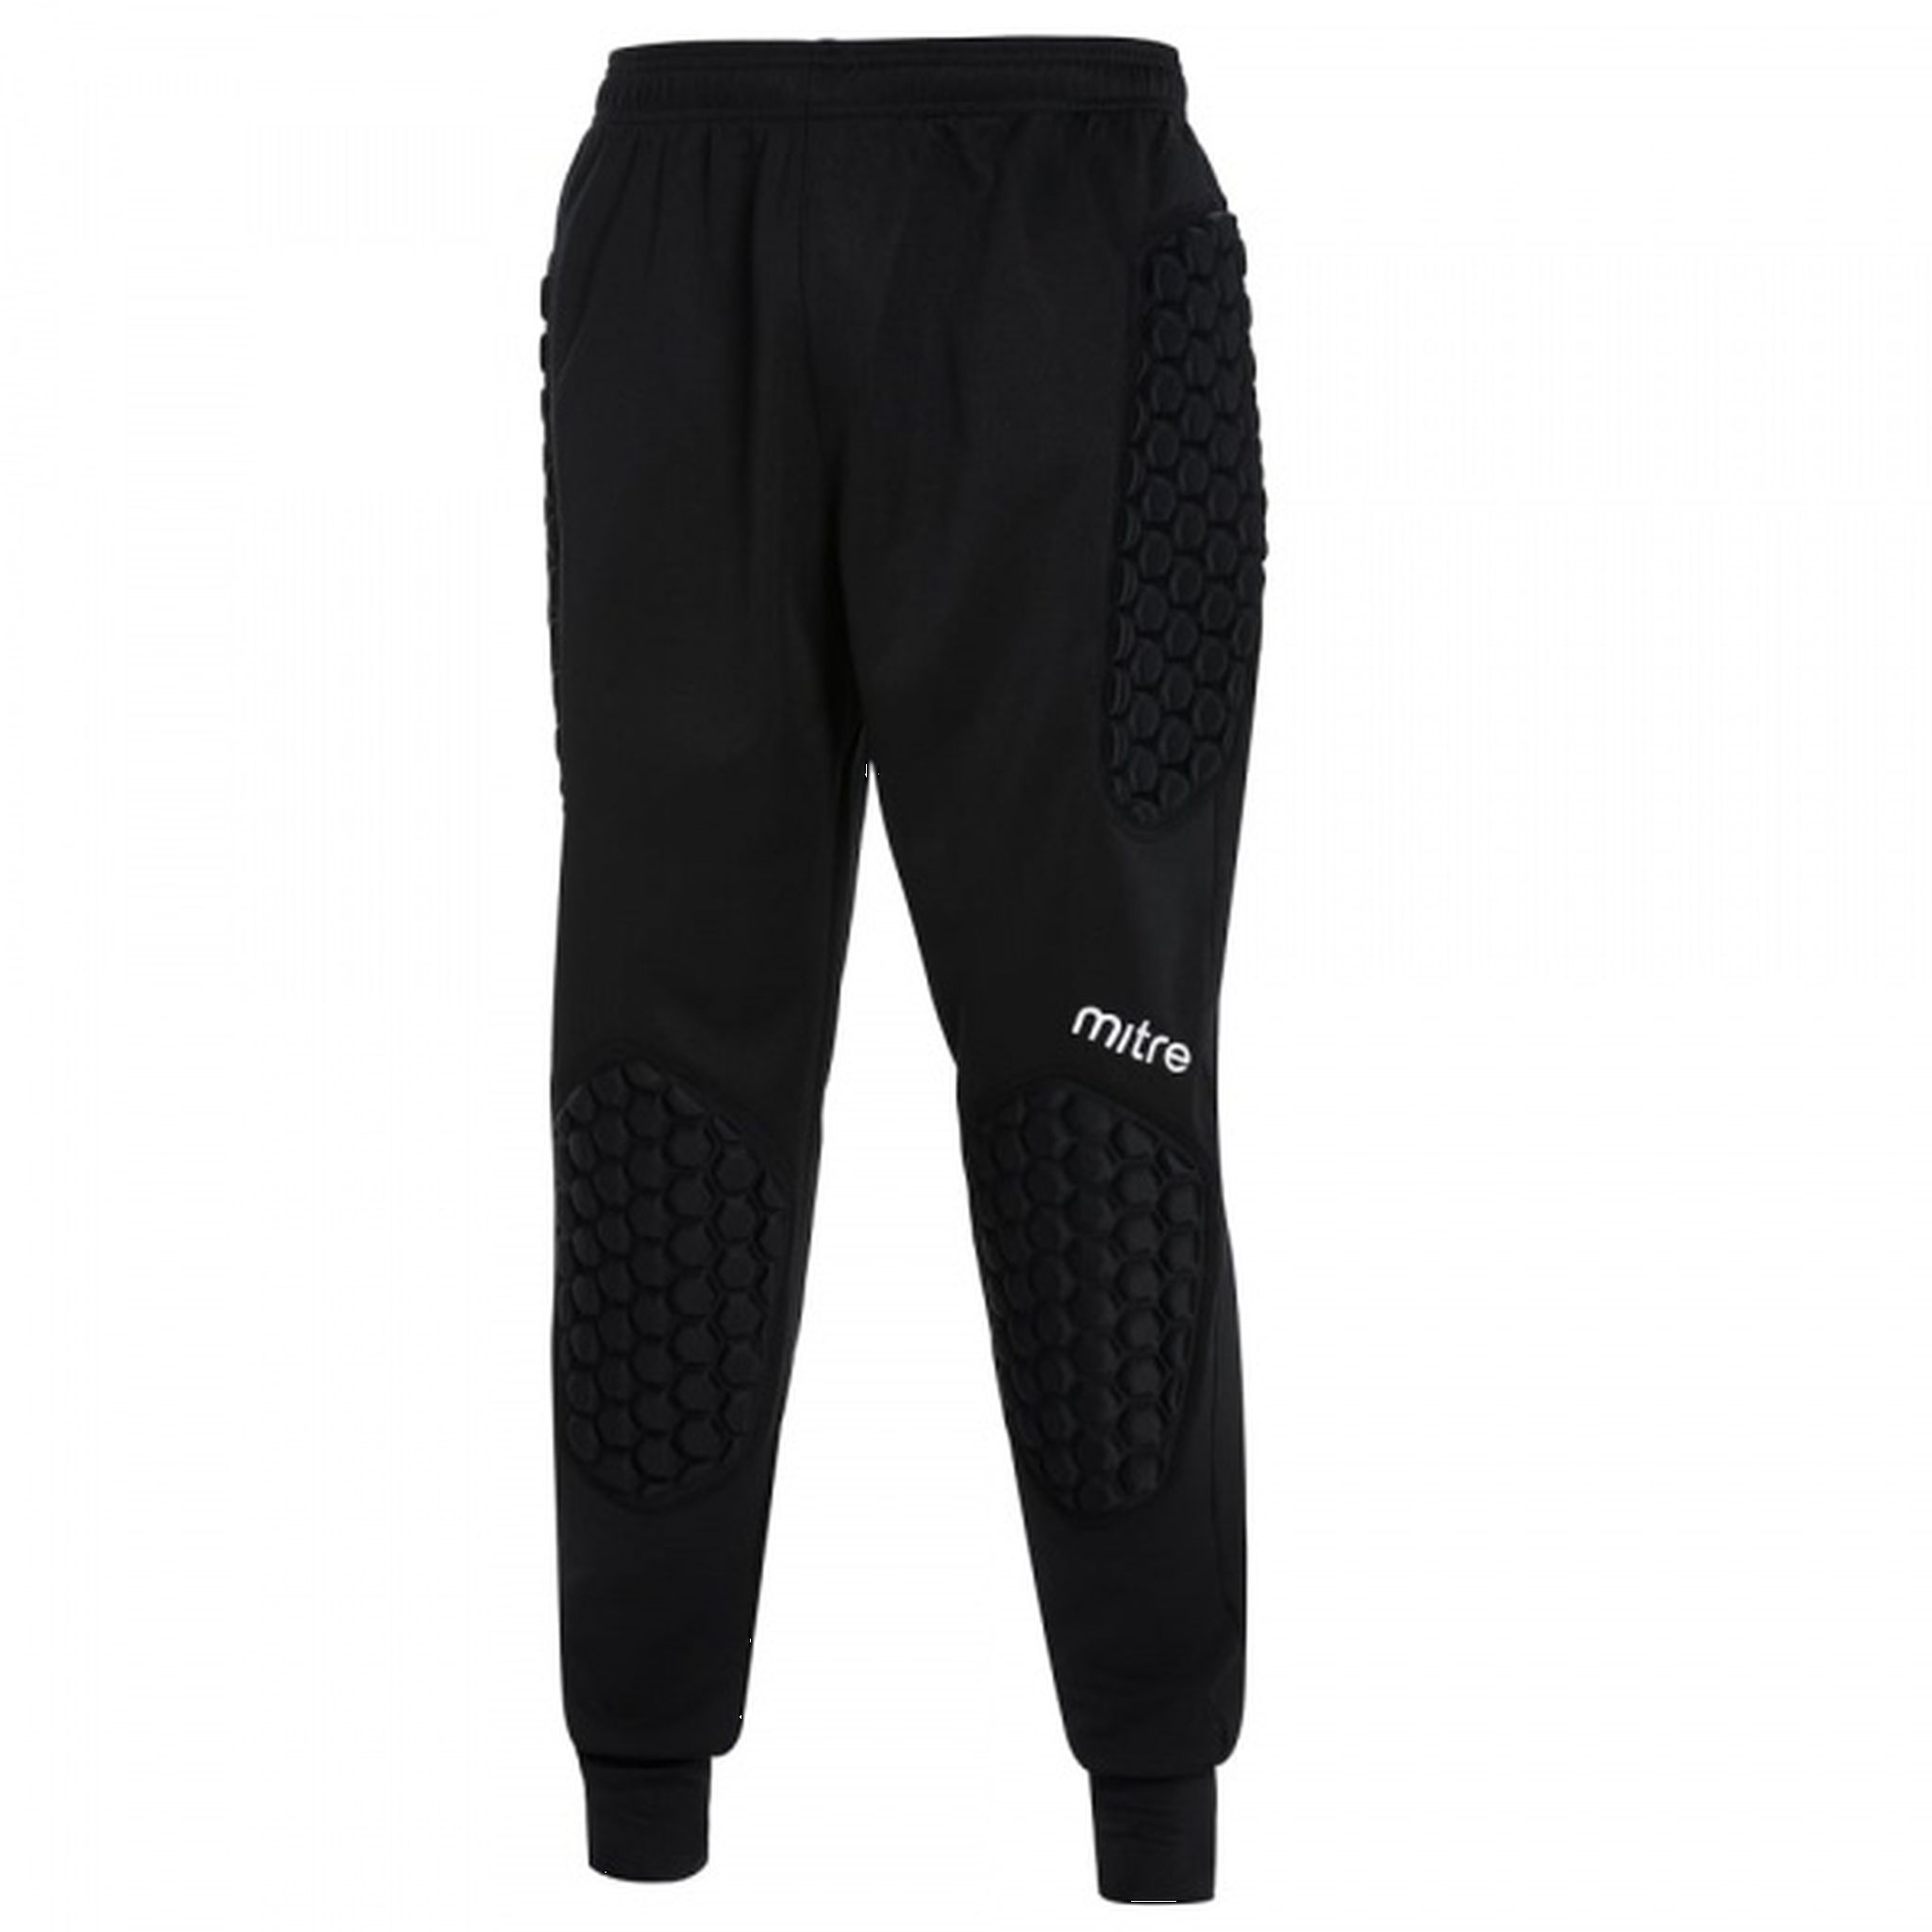 Mitre Guard Adults Padded Goalkeeper Pant